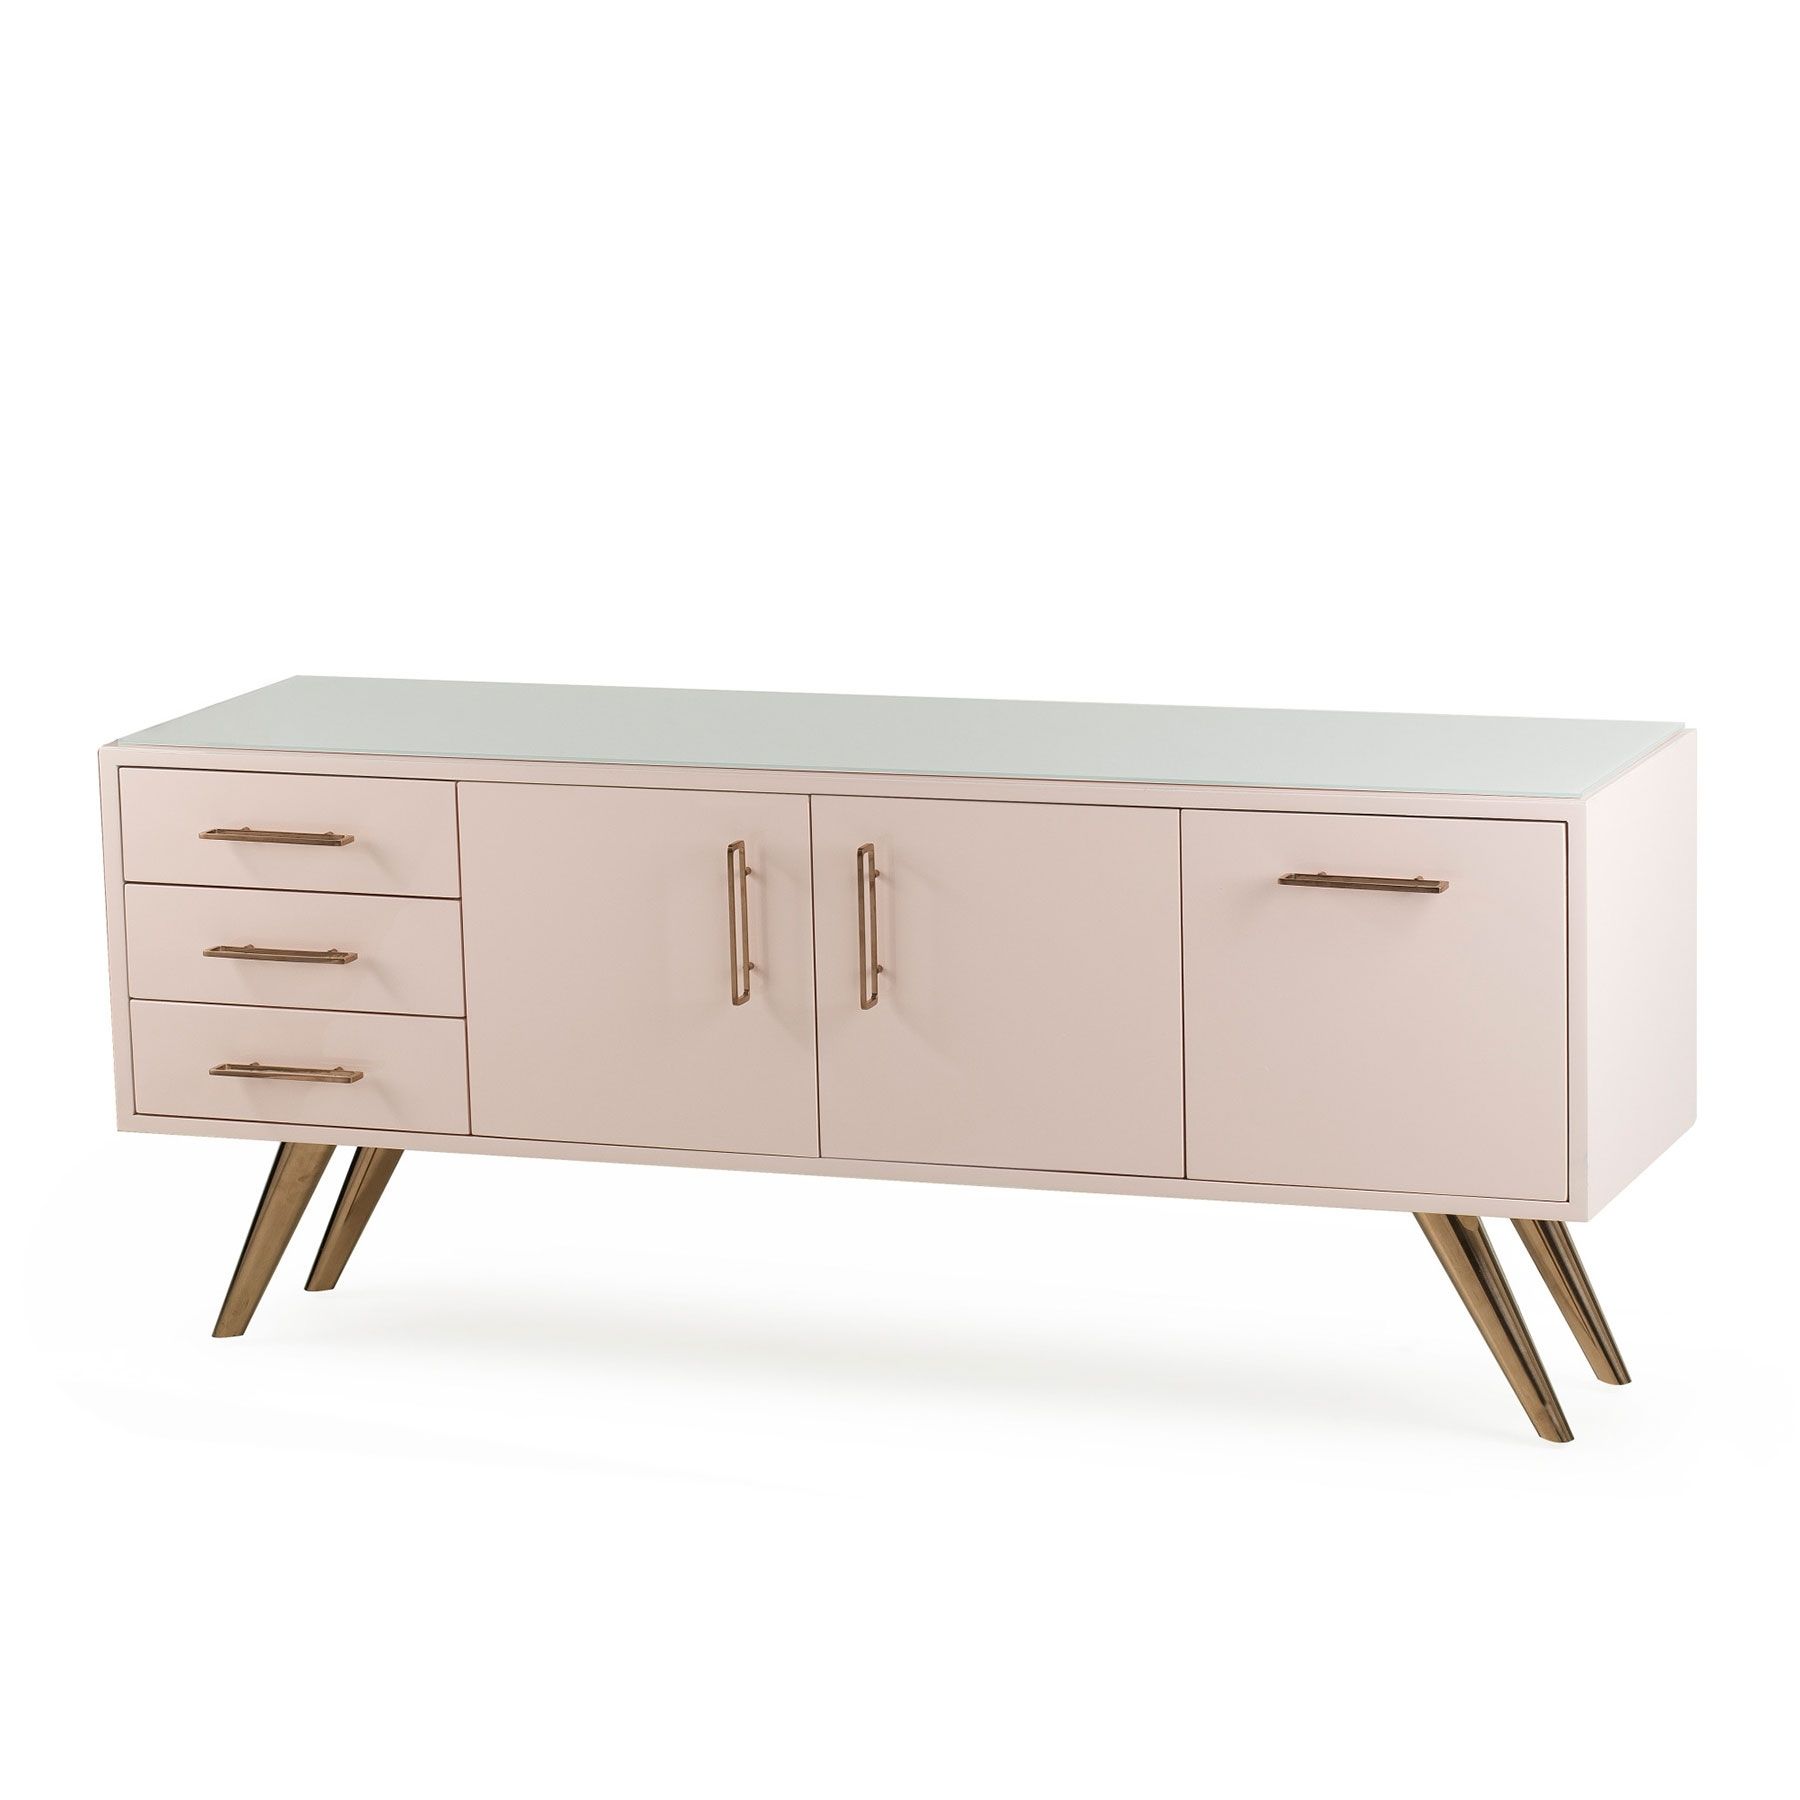 Diaz Chest – Rose Gold – Sideboard – Kelly Hoppen | Resource Decor With Most Popular Burn Tan Finish 2 Door Sideboards (View 20 of 20)